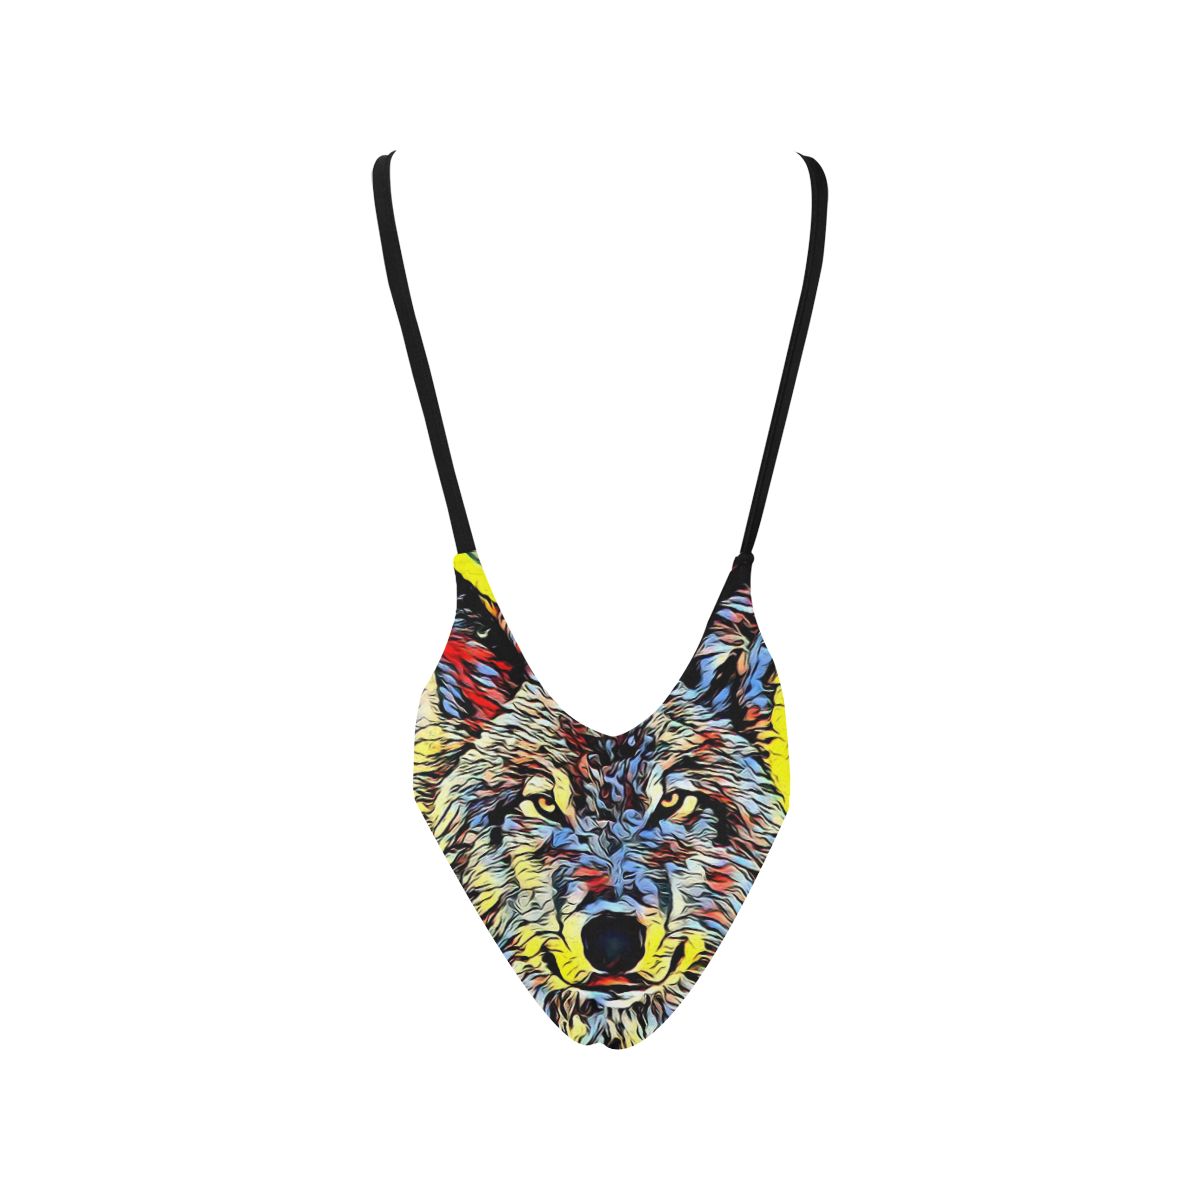 WOLF MULTICOLOR Sexy Low Back One-Piece Swimsuit (Model S09)